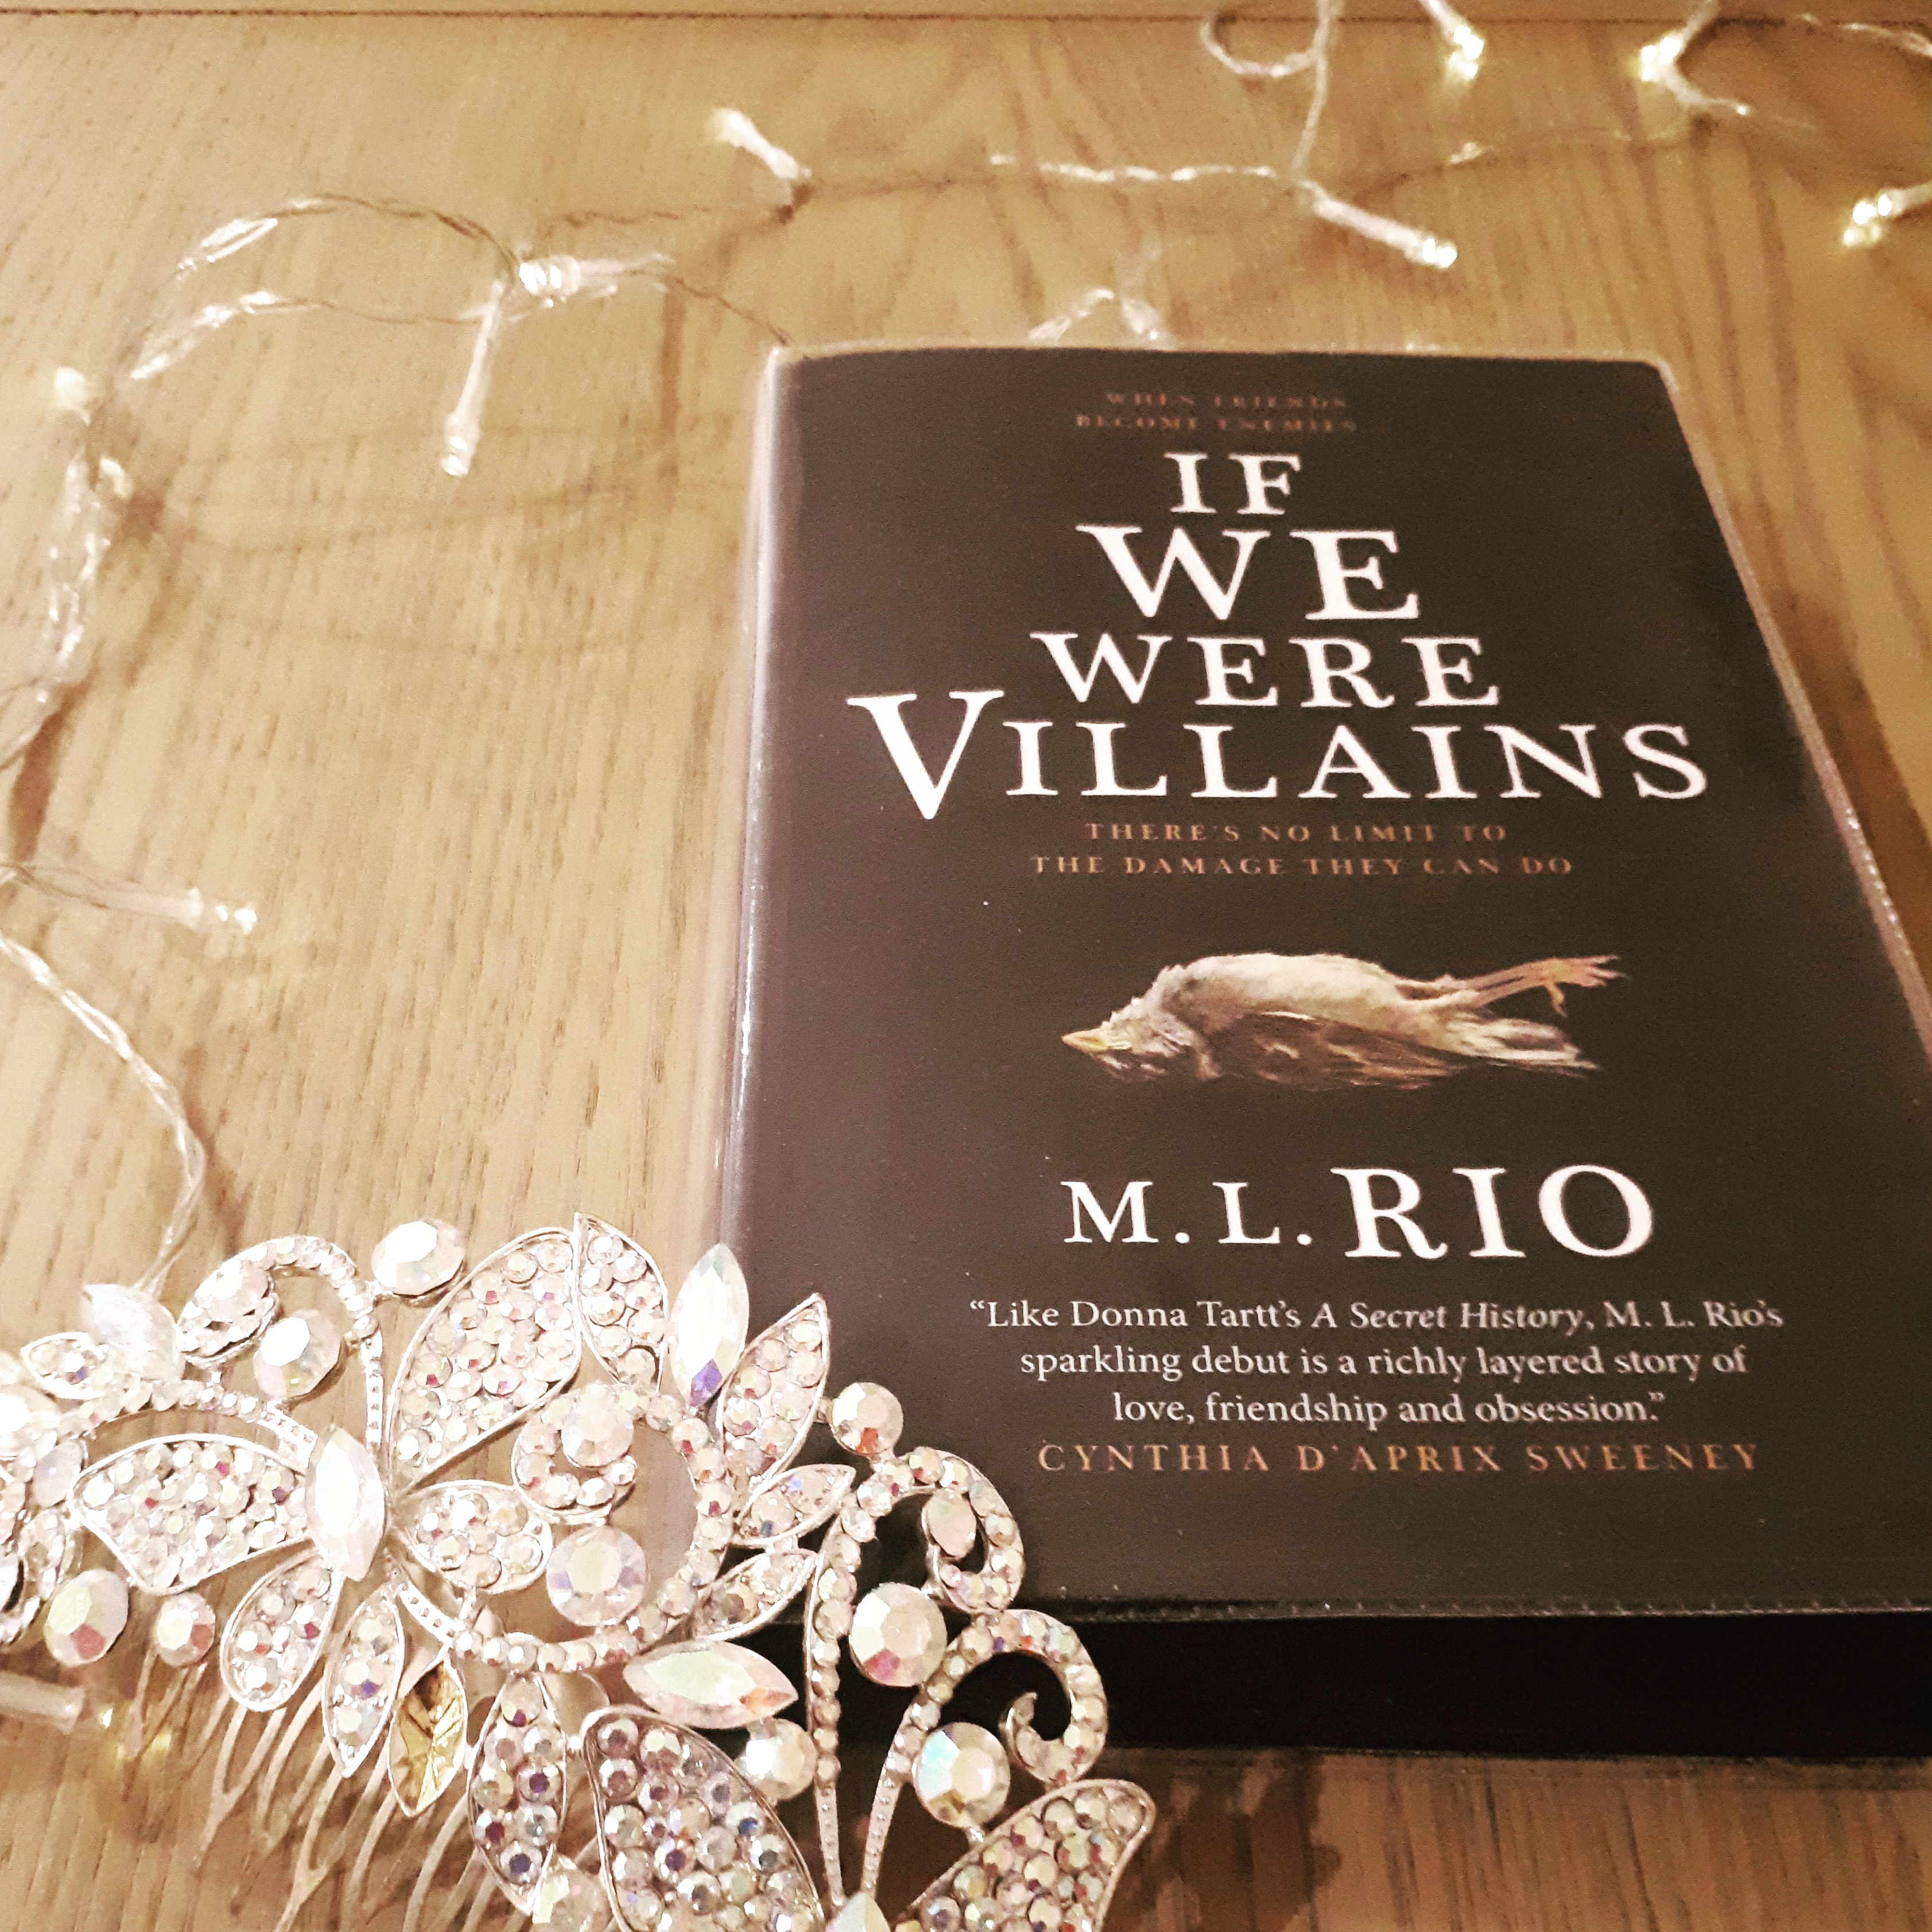 If We Were Villains (M.L.Rio) – Just Me and a Pad of Paper